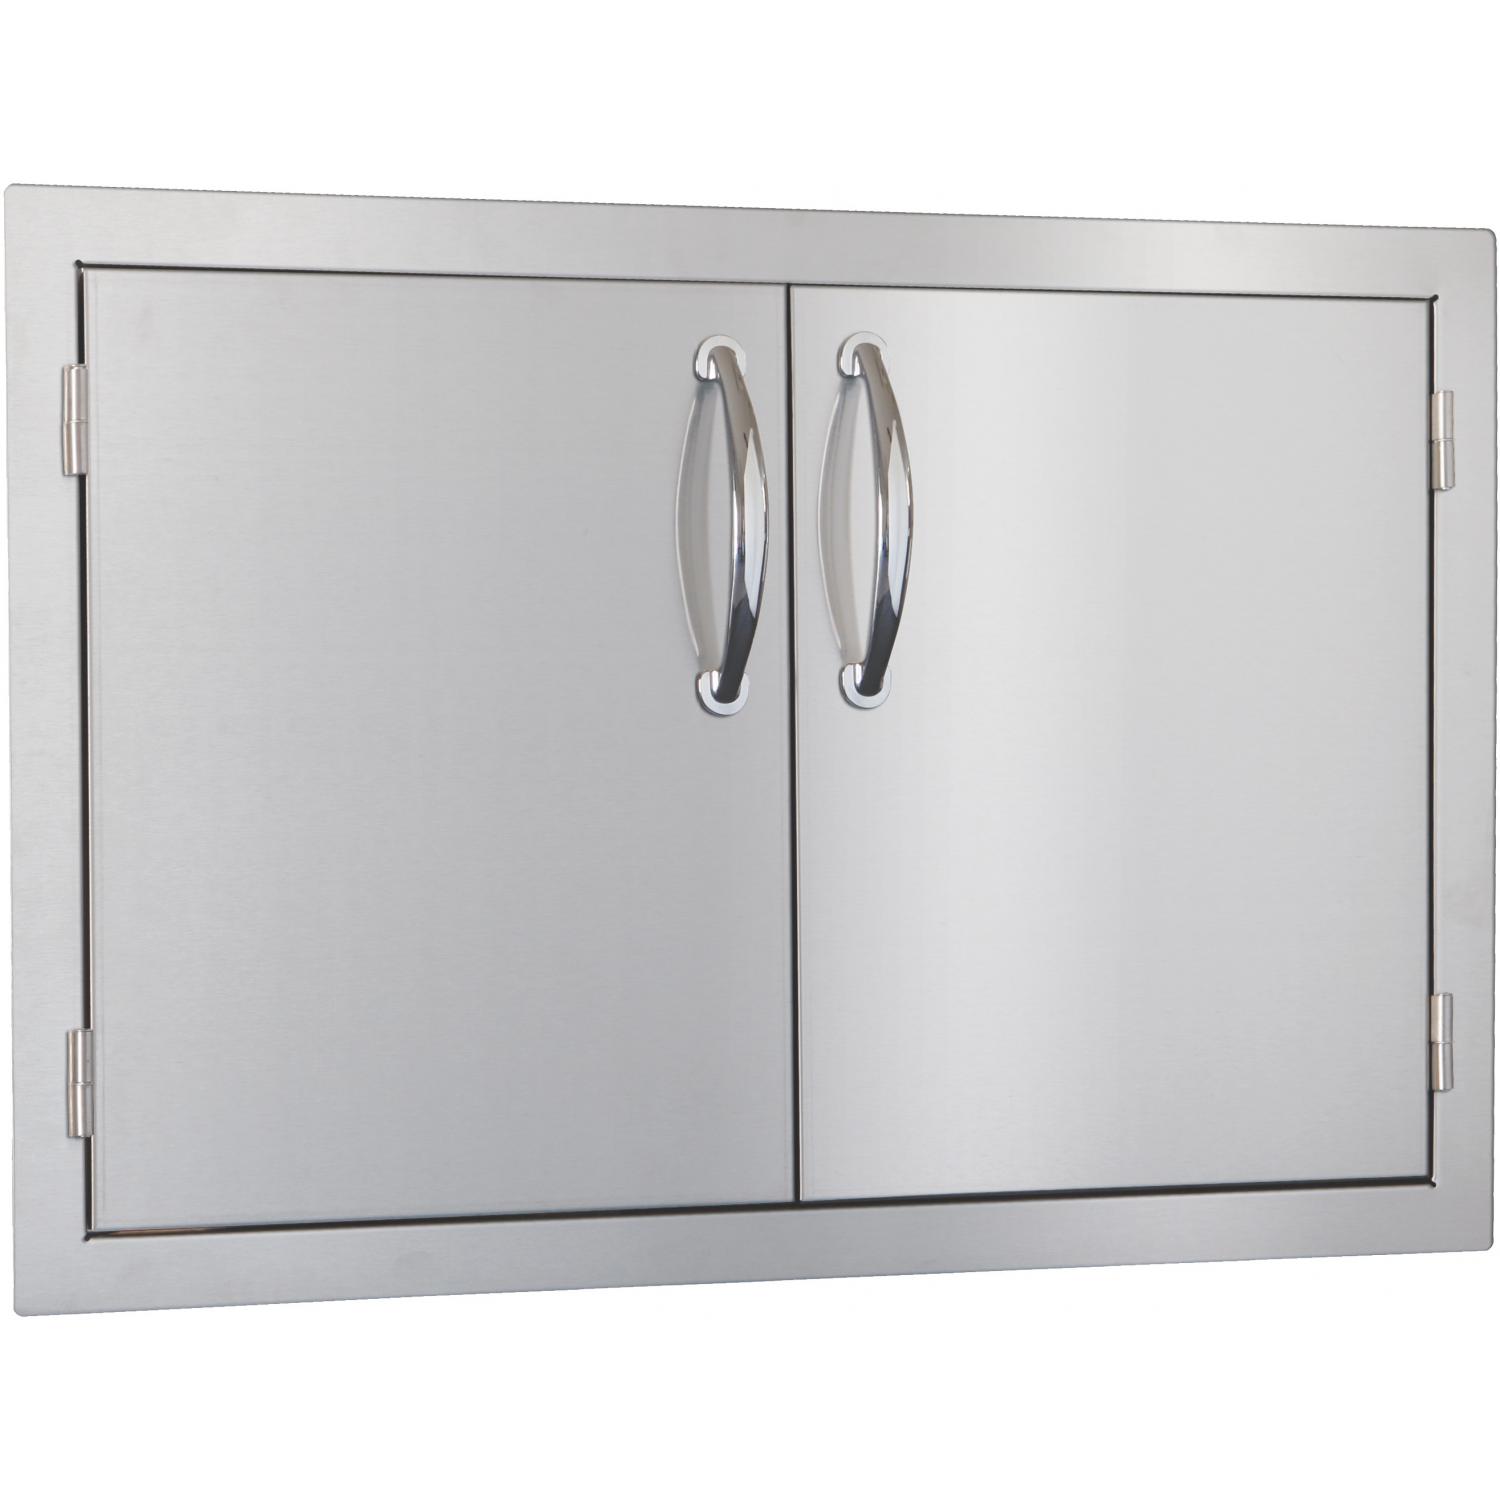 33 inch double access door product image